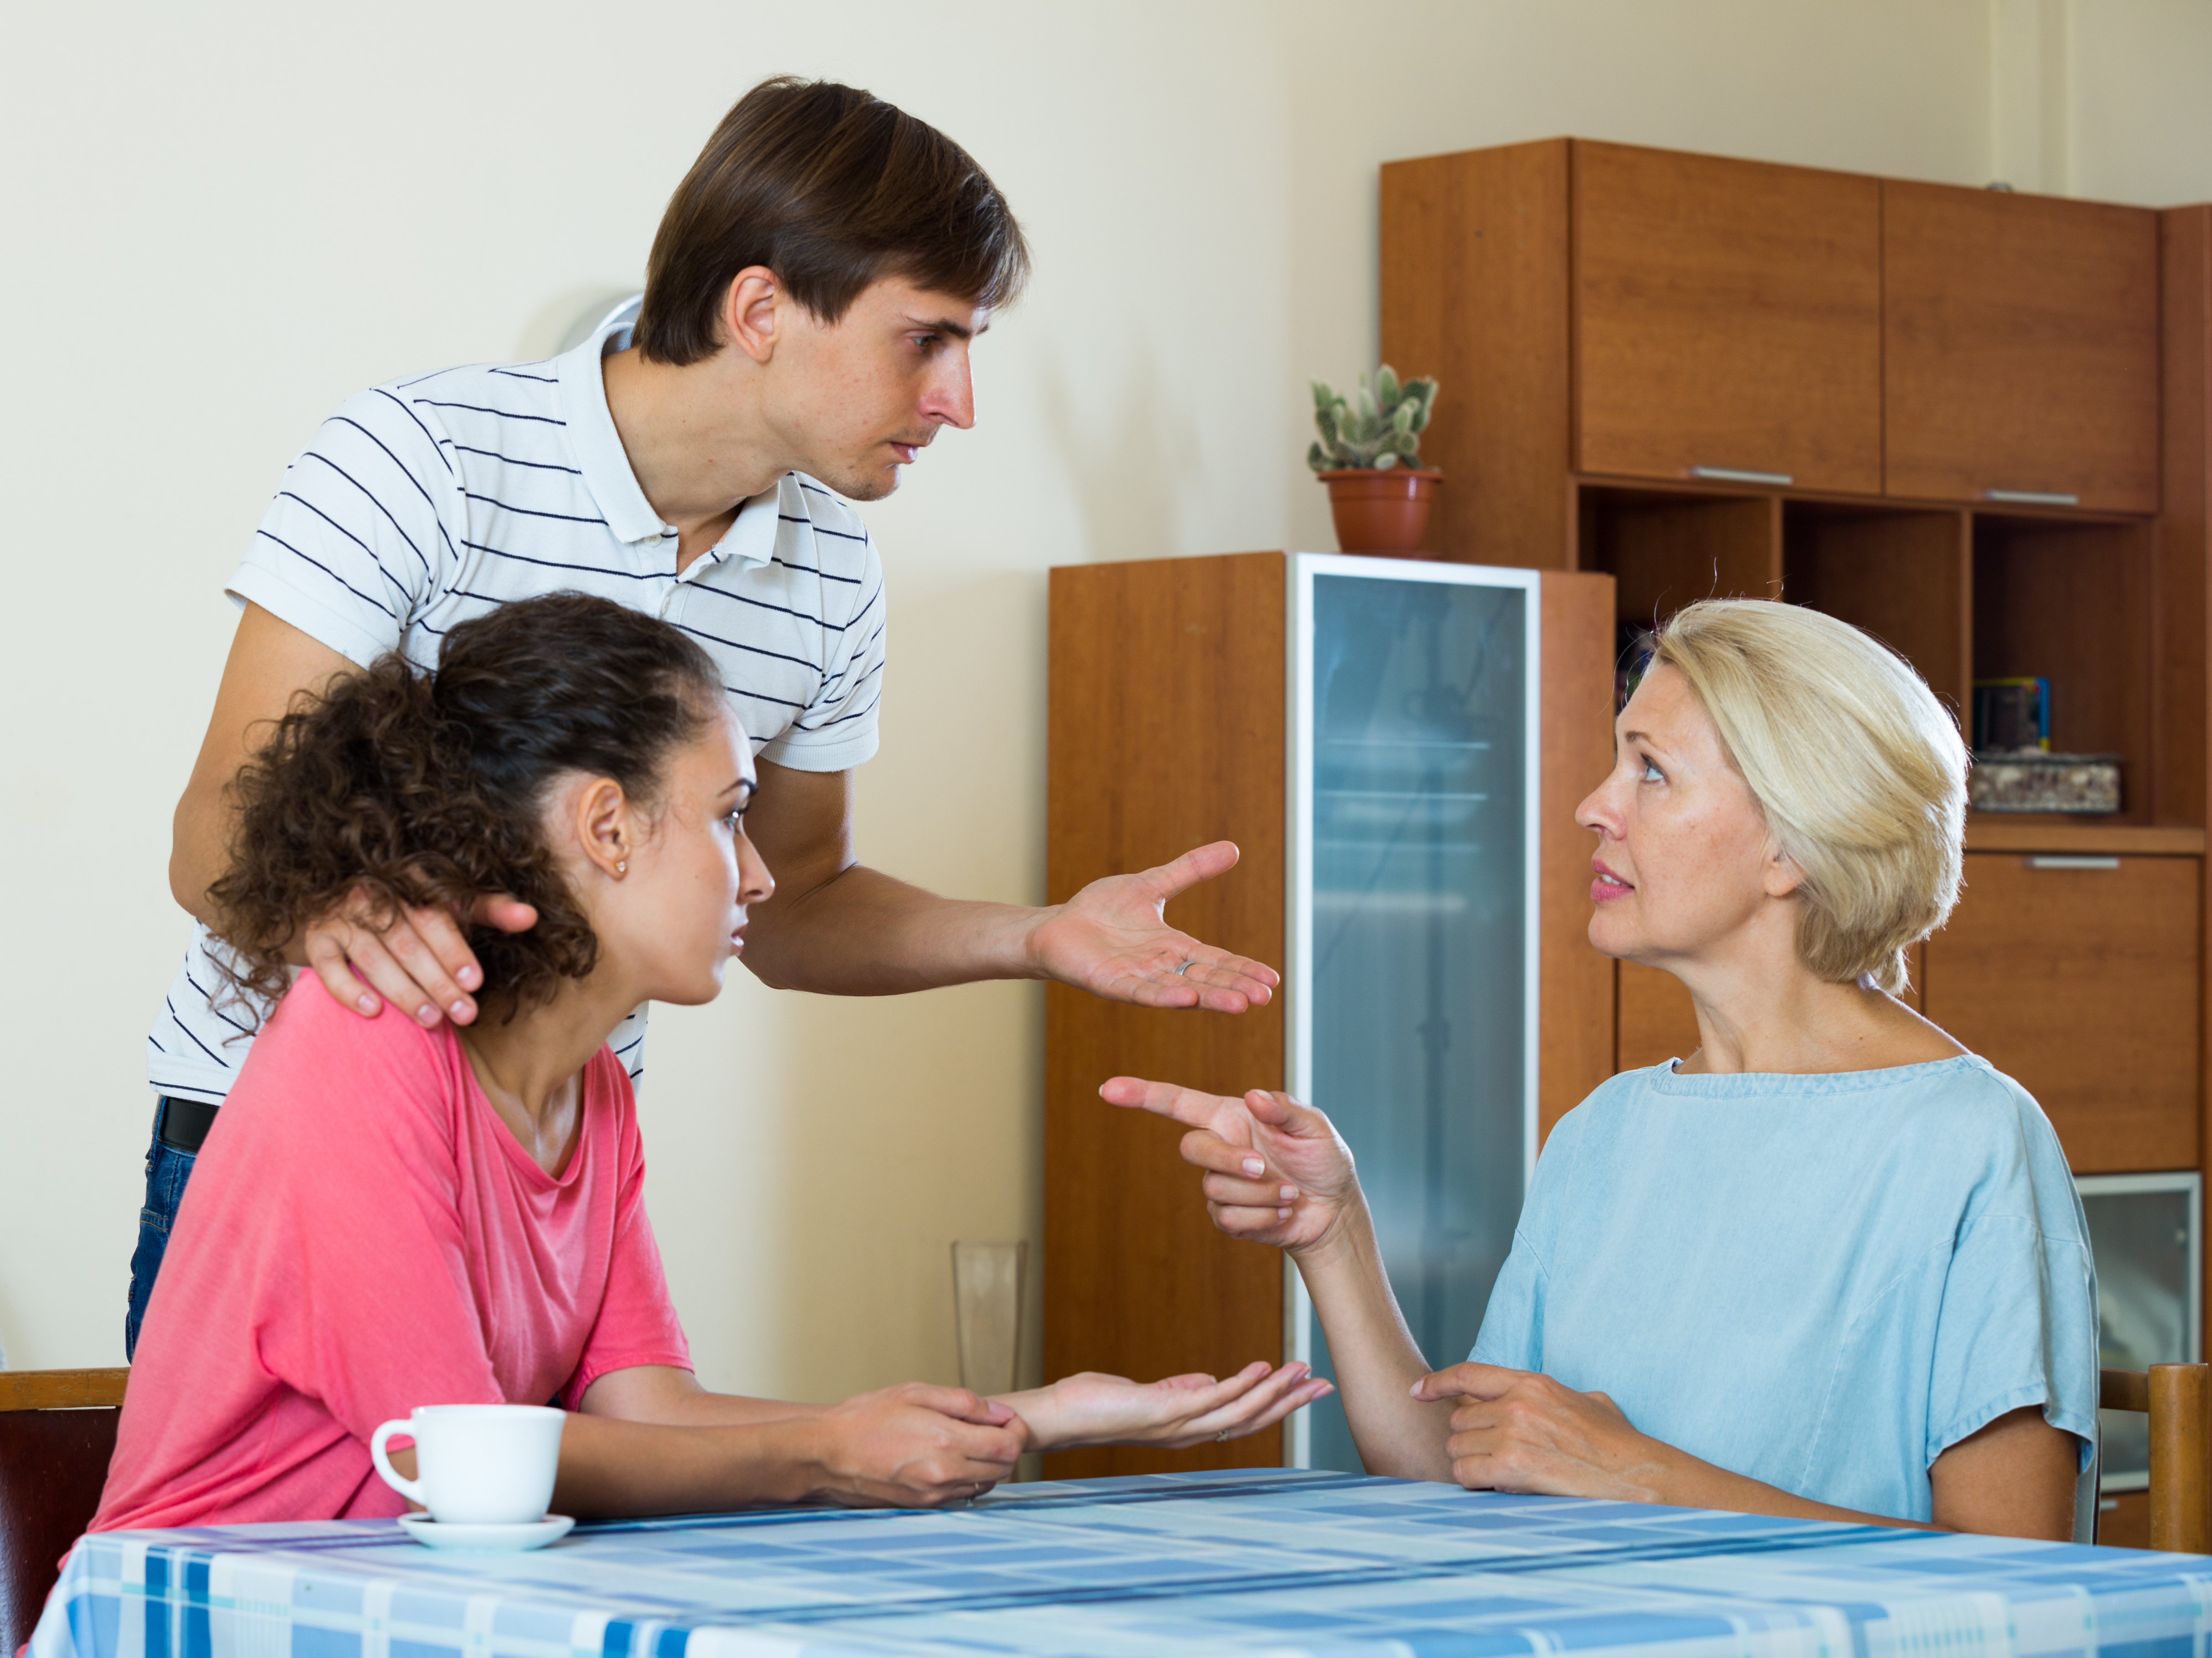 A married couple having a serious discussion with their senior mother | Source: Shutterstock